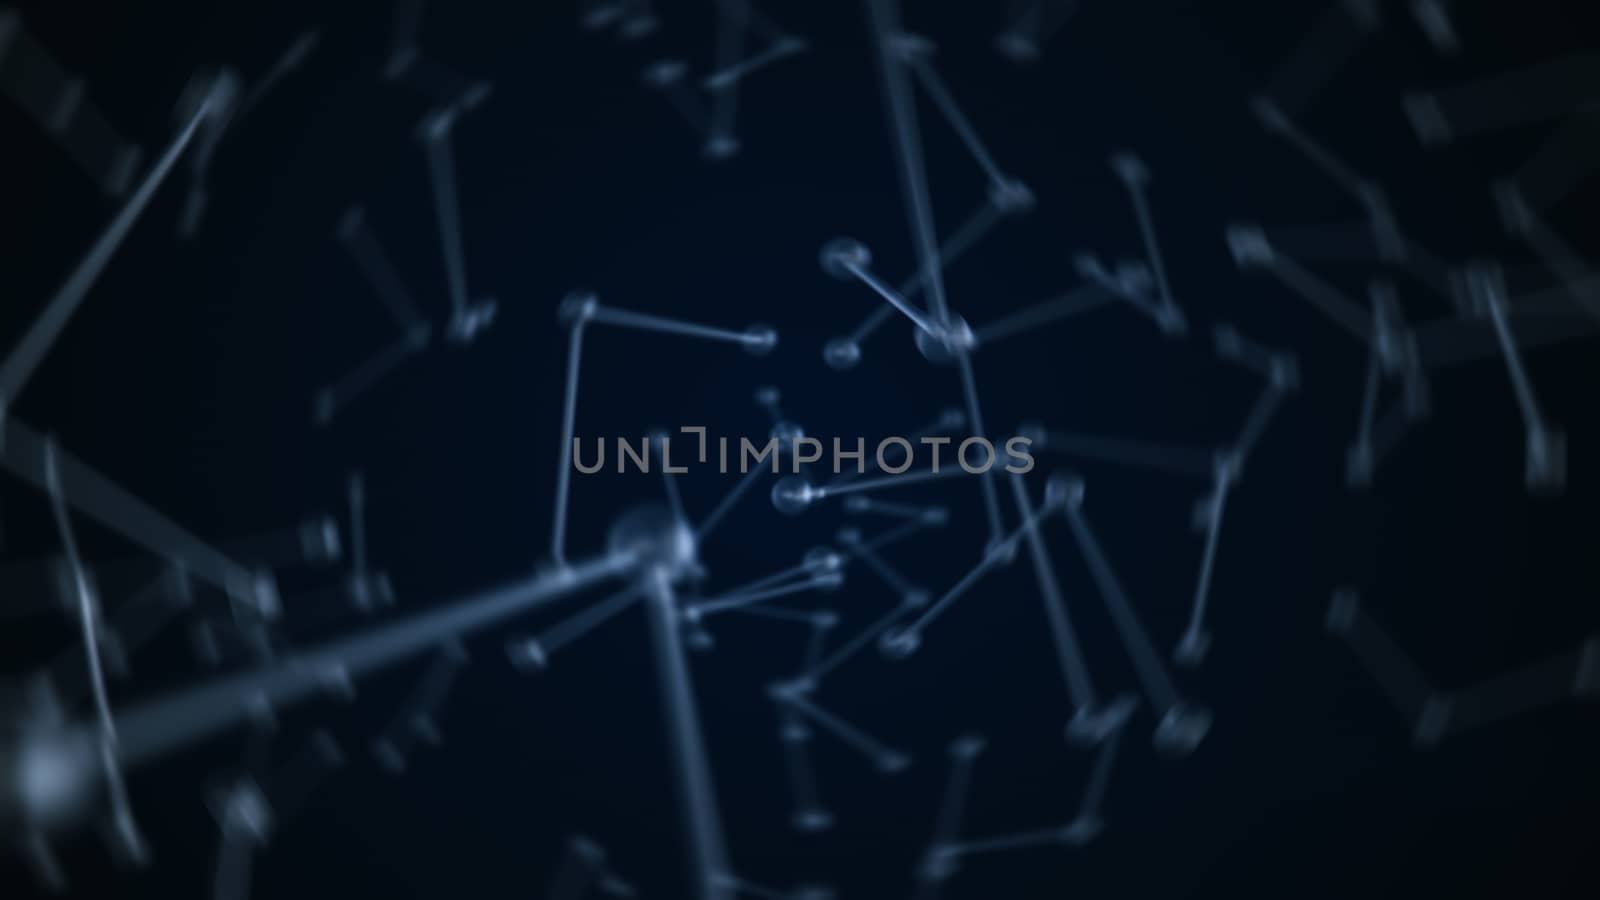 Abstract background with molecule structure. 3d rendering